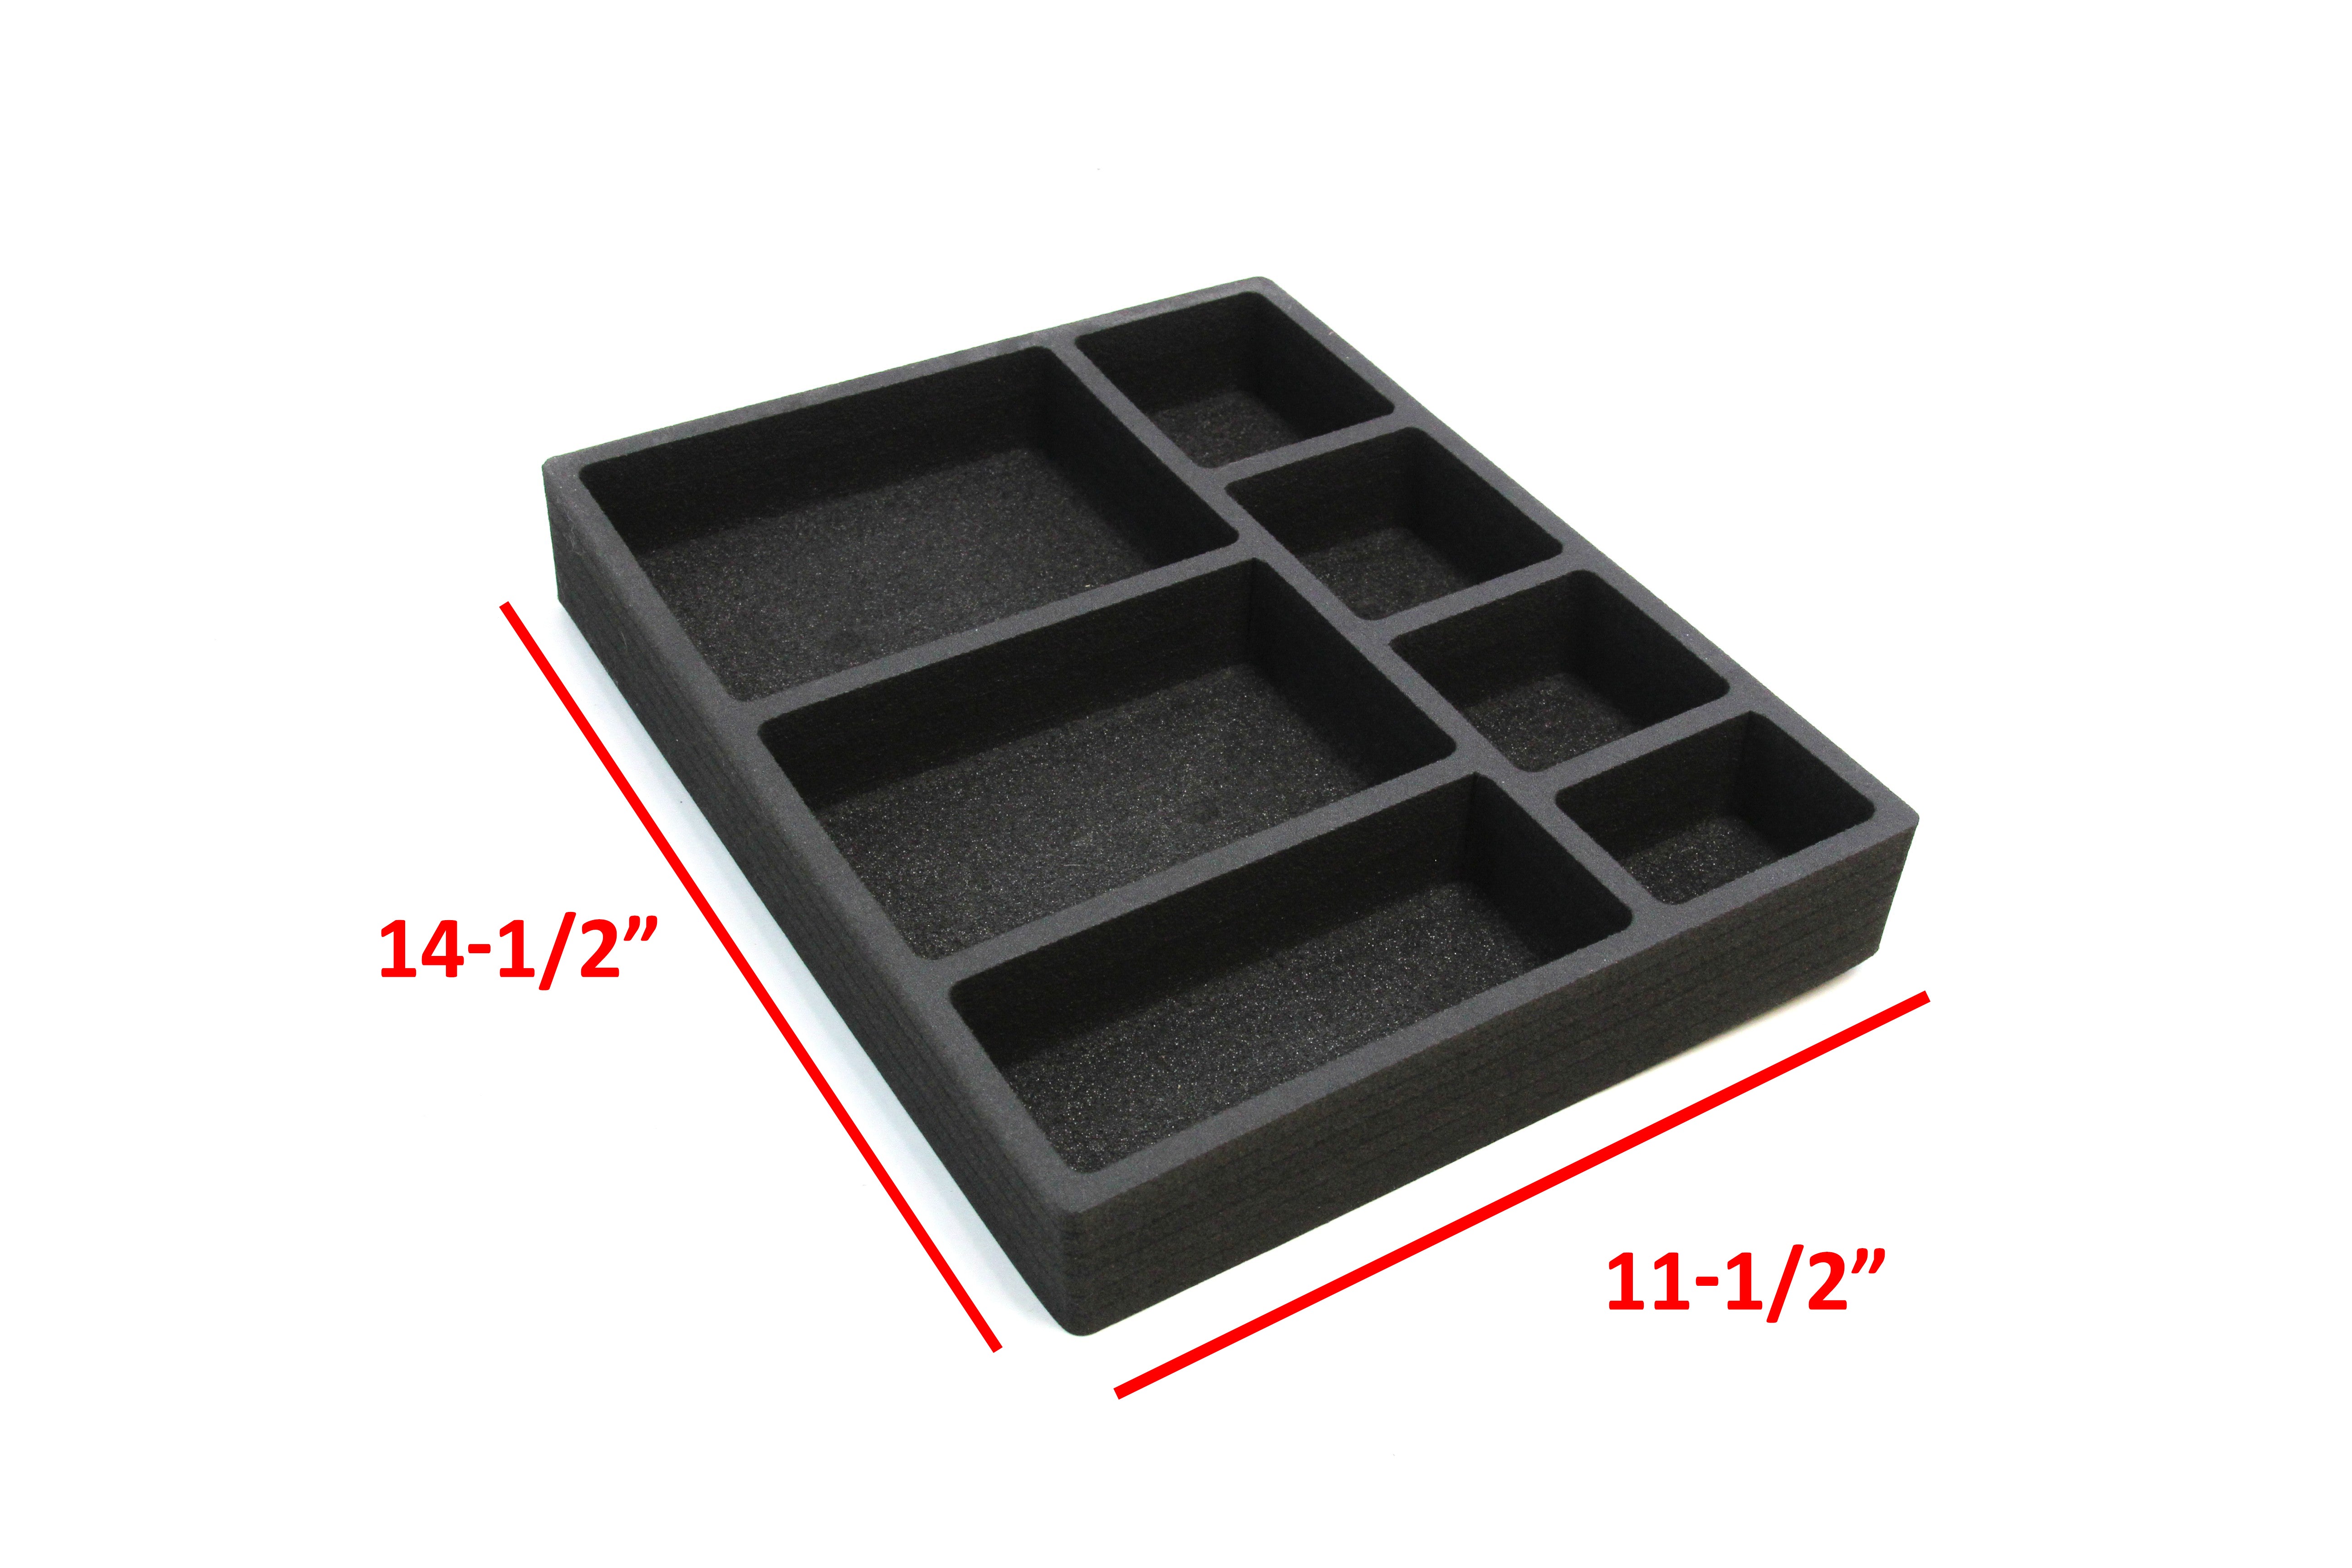 Drawer Organizer 7 Compartment Fits IKEA Alex and Many Others 11.5" x 14.5"